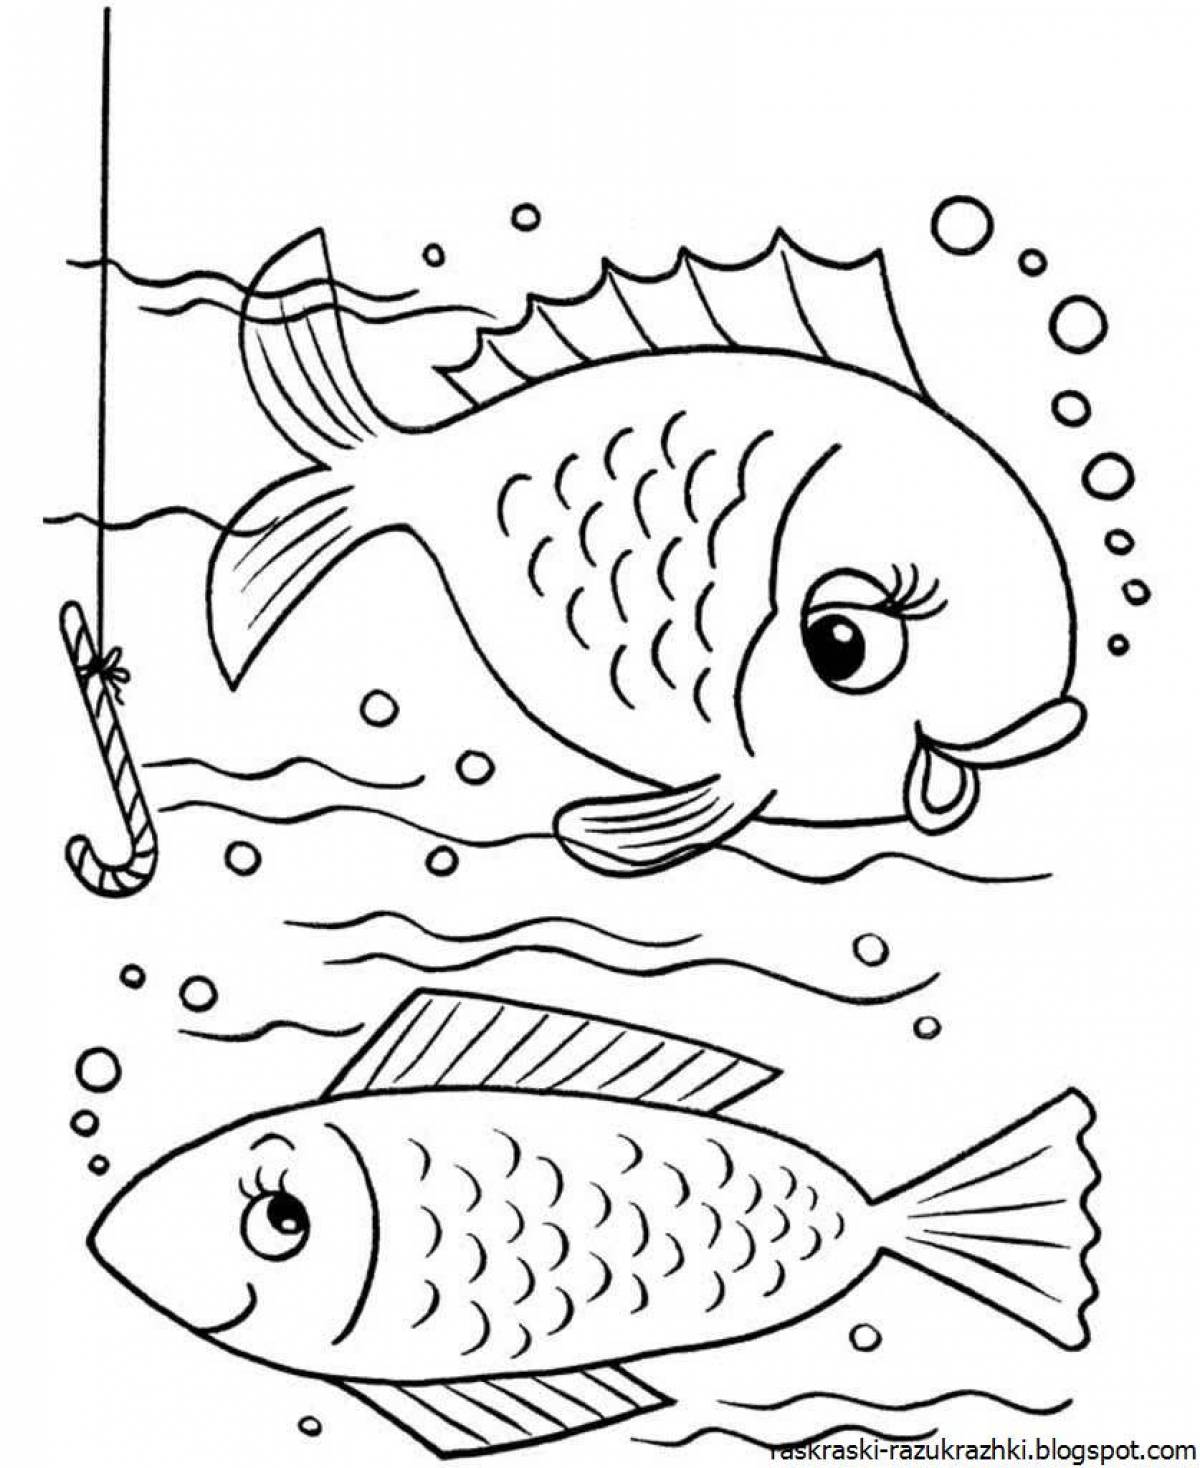 A fun coloring book for kids 4-5 years old